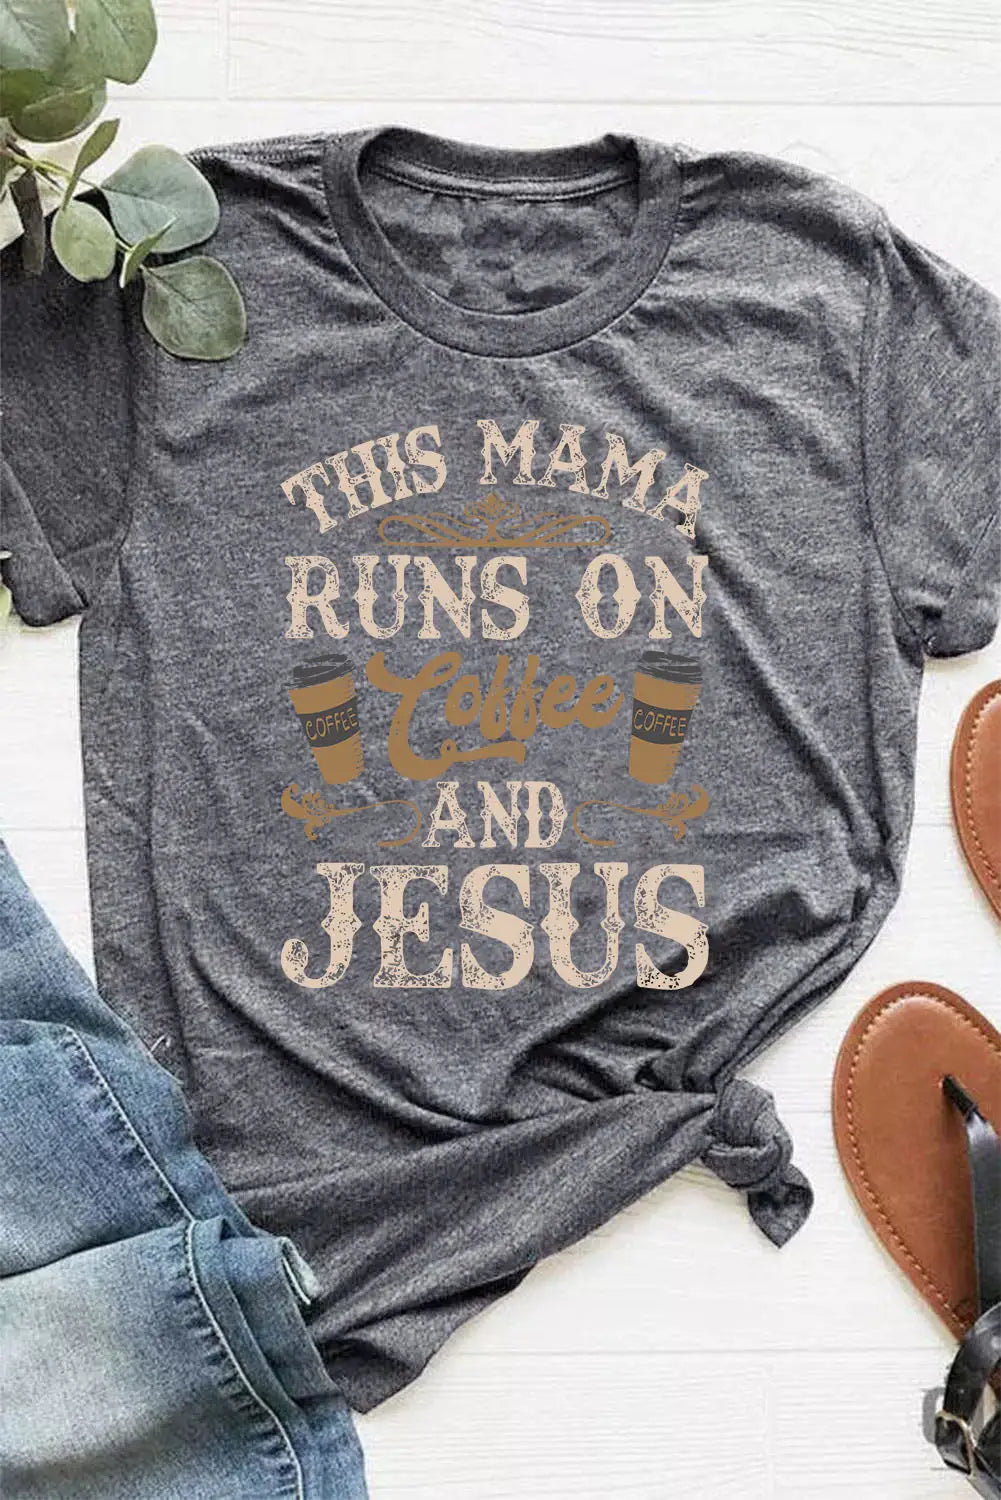 Gray coffee and jesus graphic t-shirt - t-shirts